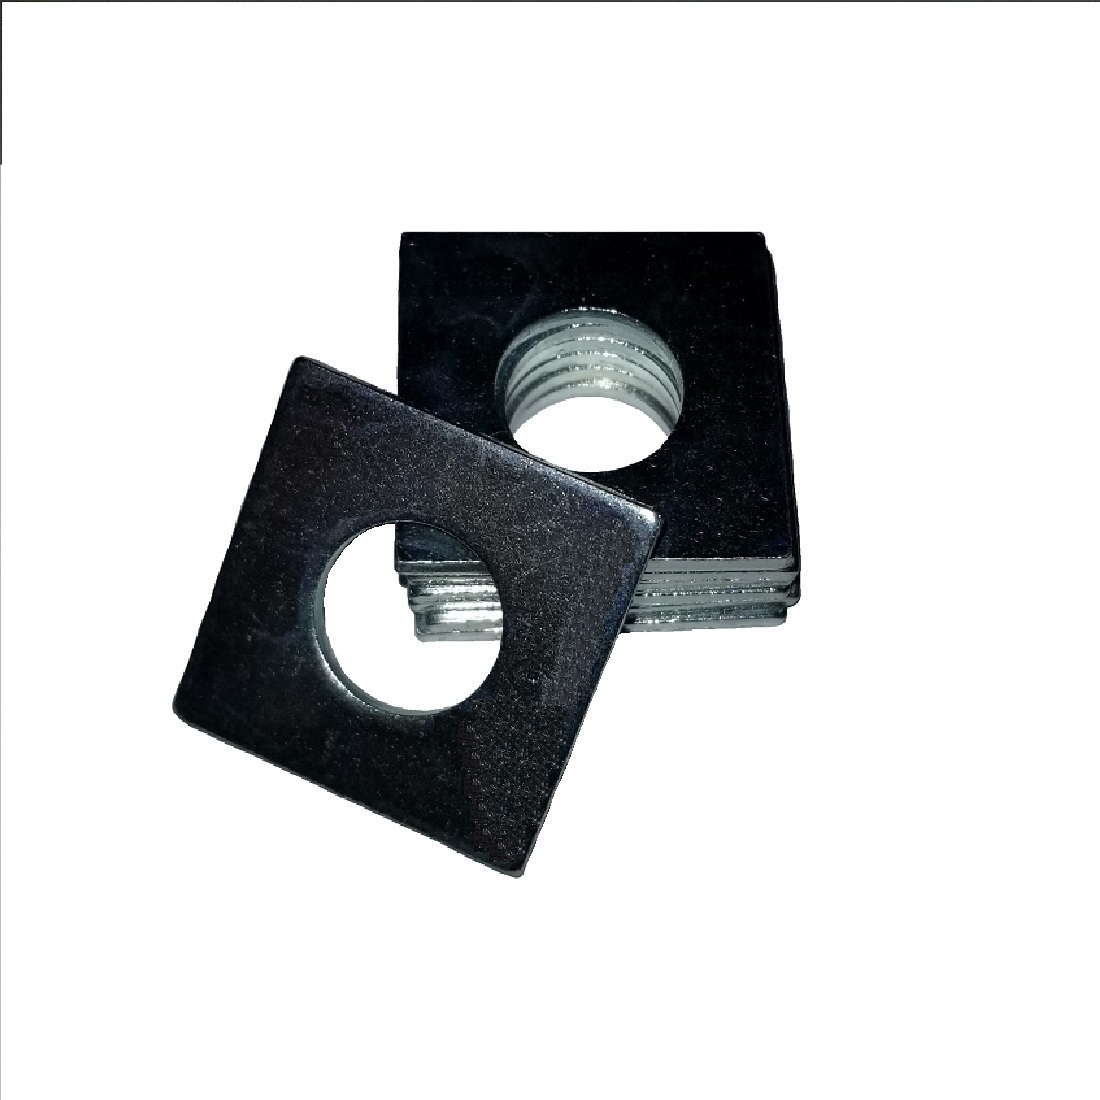 Square OD Washer - 0.562 ID, 2.125 OD, 0.105 Thick, Low Carbon Steel - Soft, Zinc & Clear